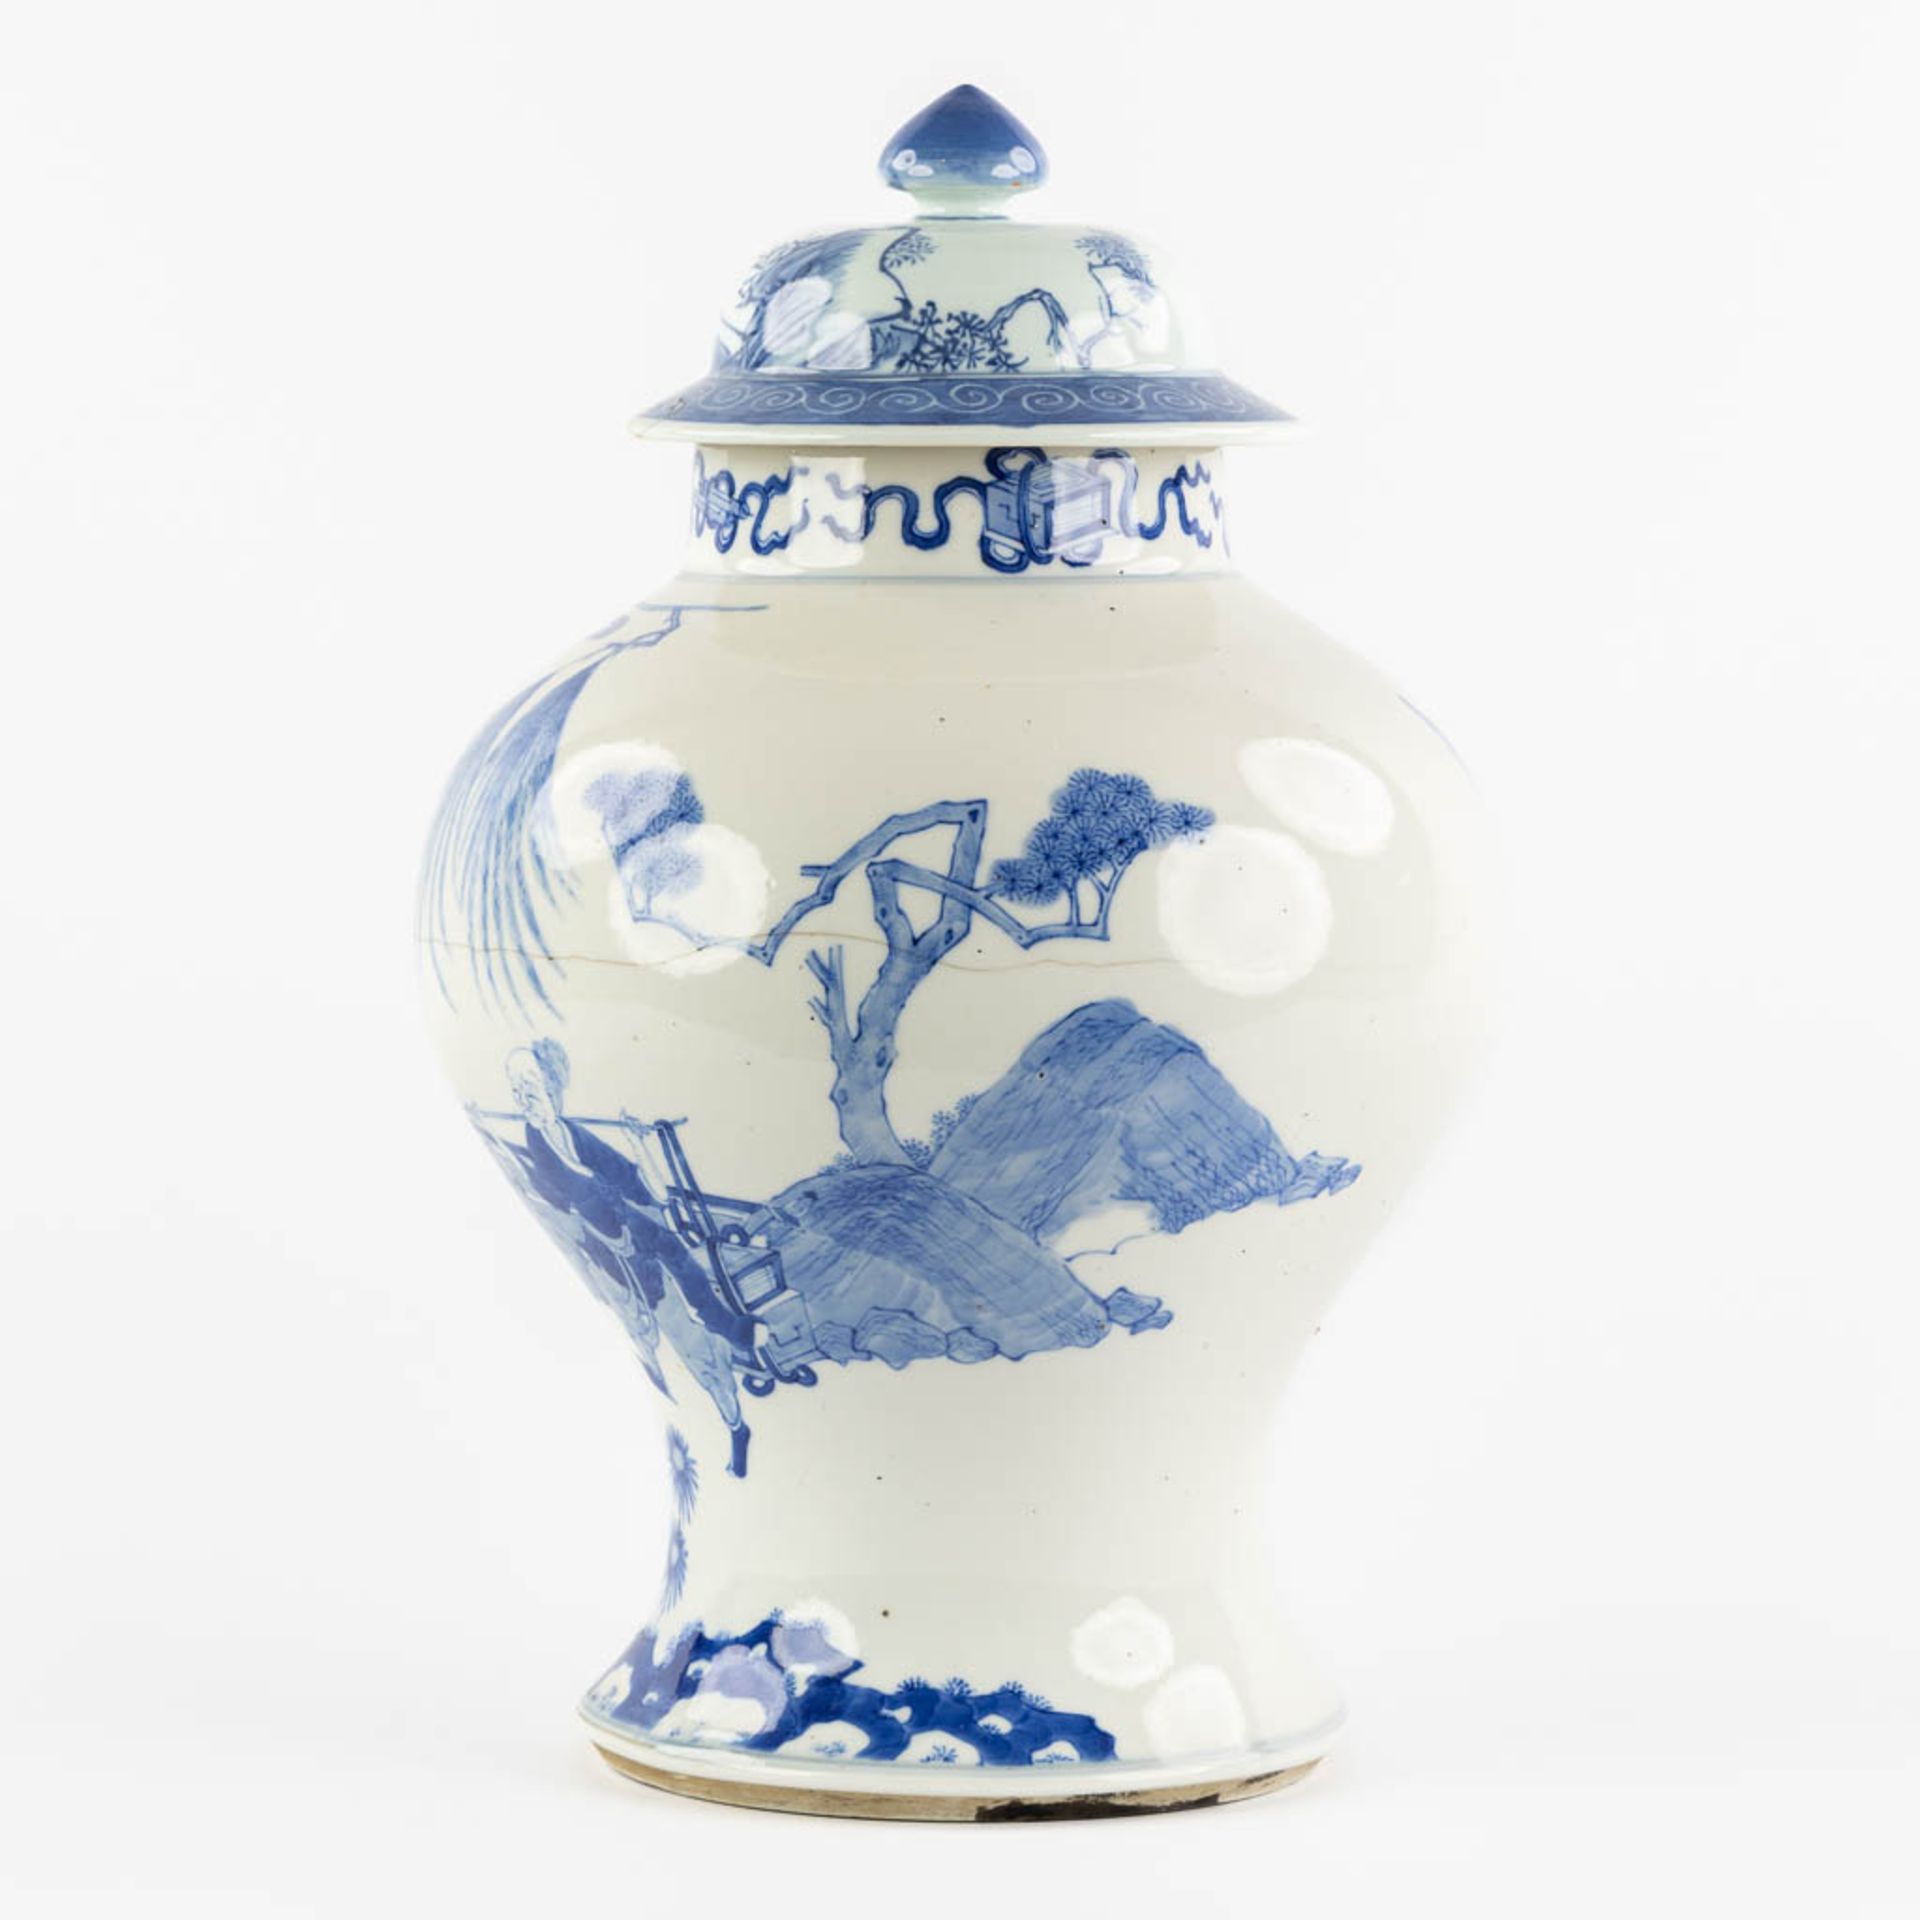 A Chinese 'Baluster' vase, blue-white decor of 'Wise Men'. (H:43 x D:29 cm) - Image 5 of 12